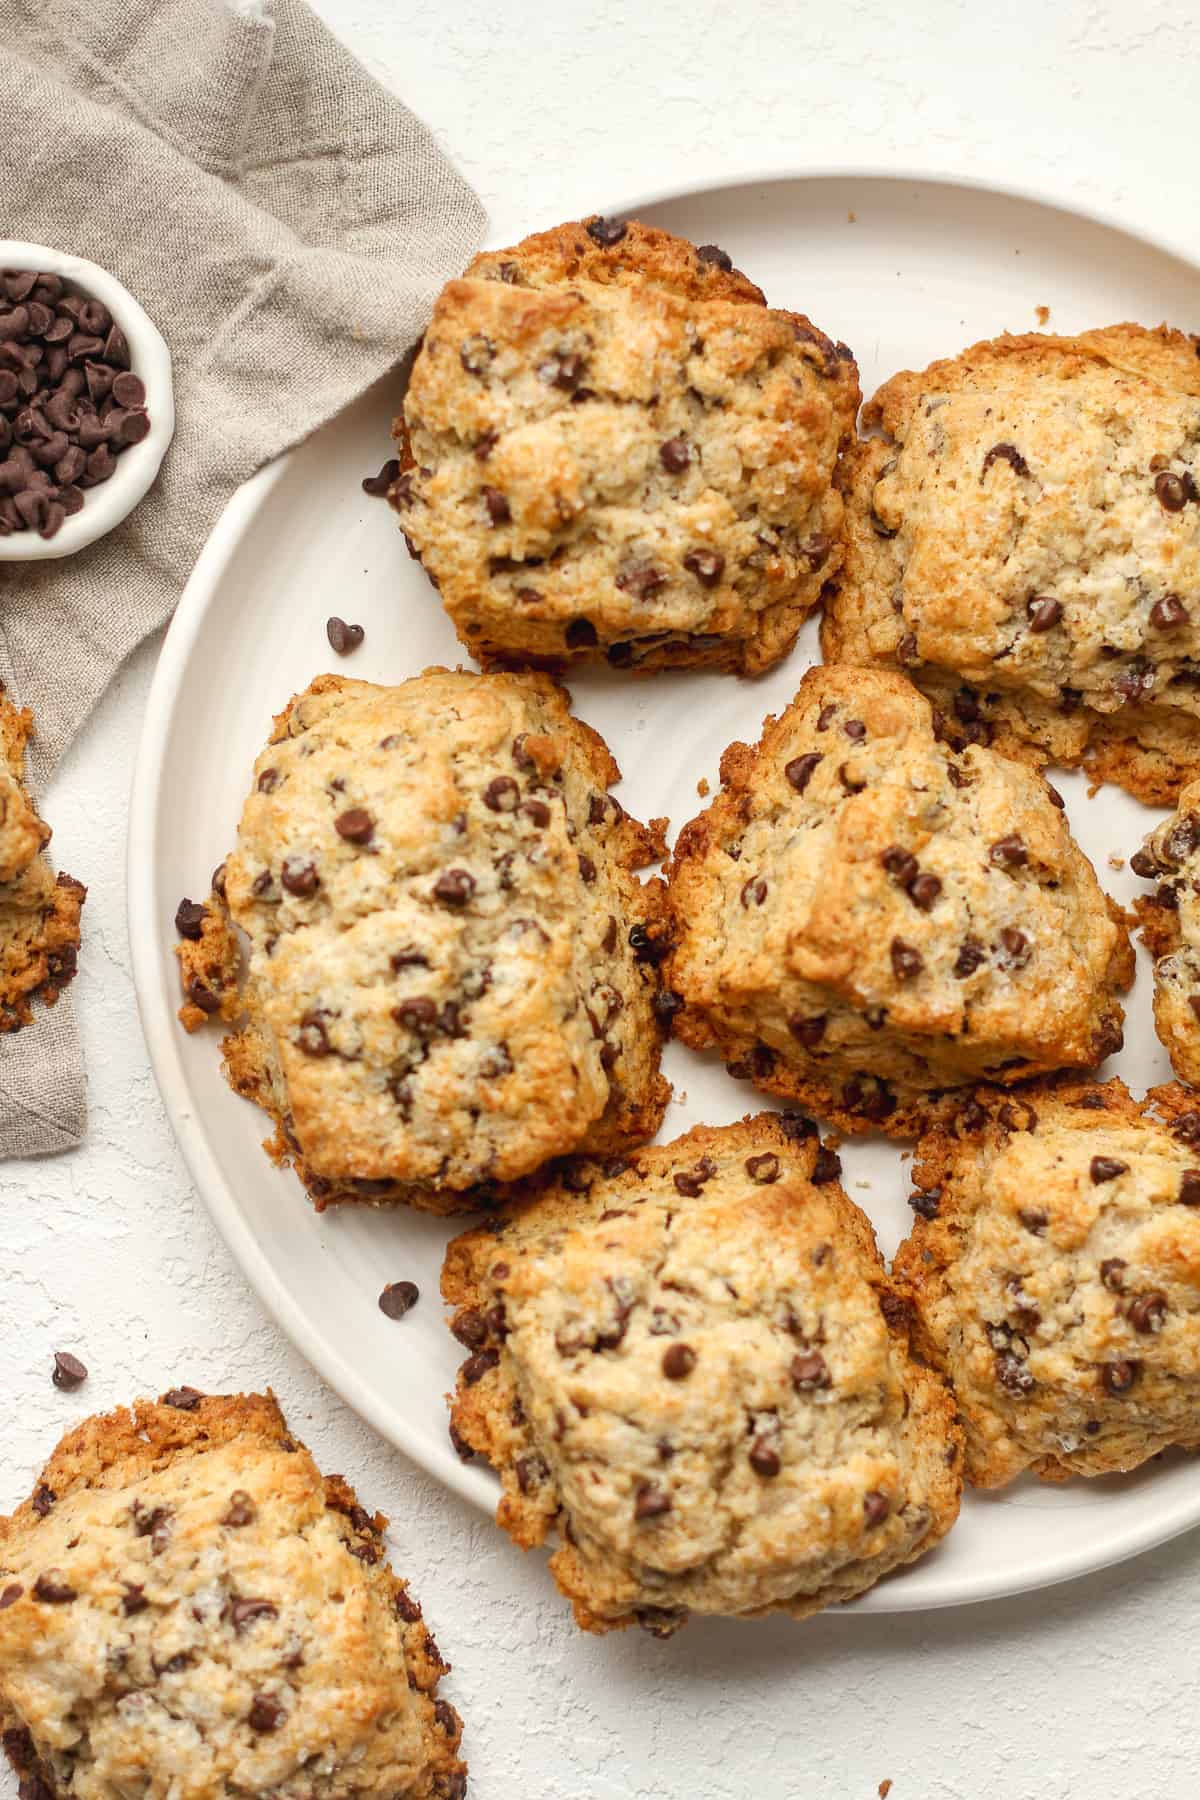 A plate of chocolate chip scones with a gray napkin.